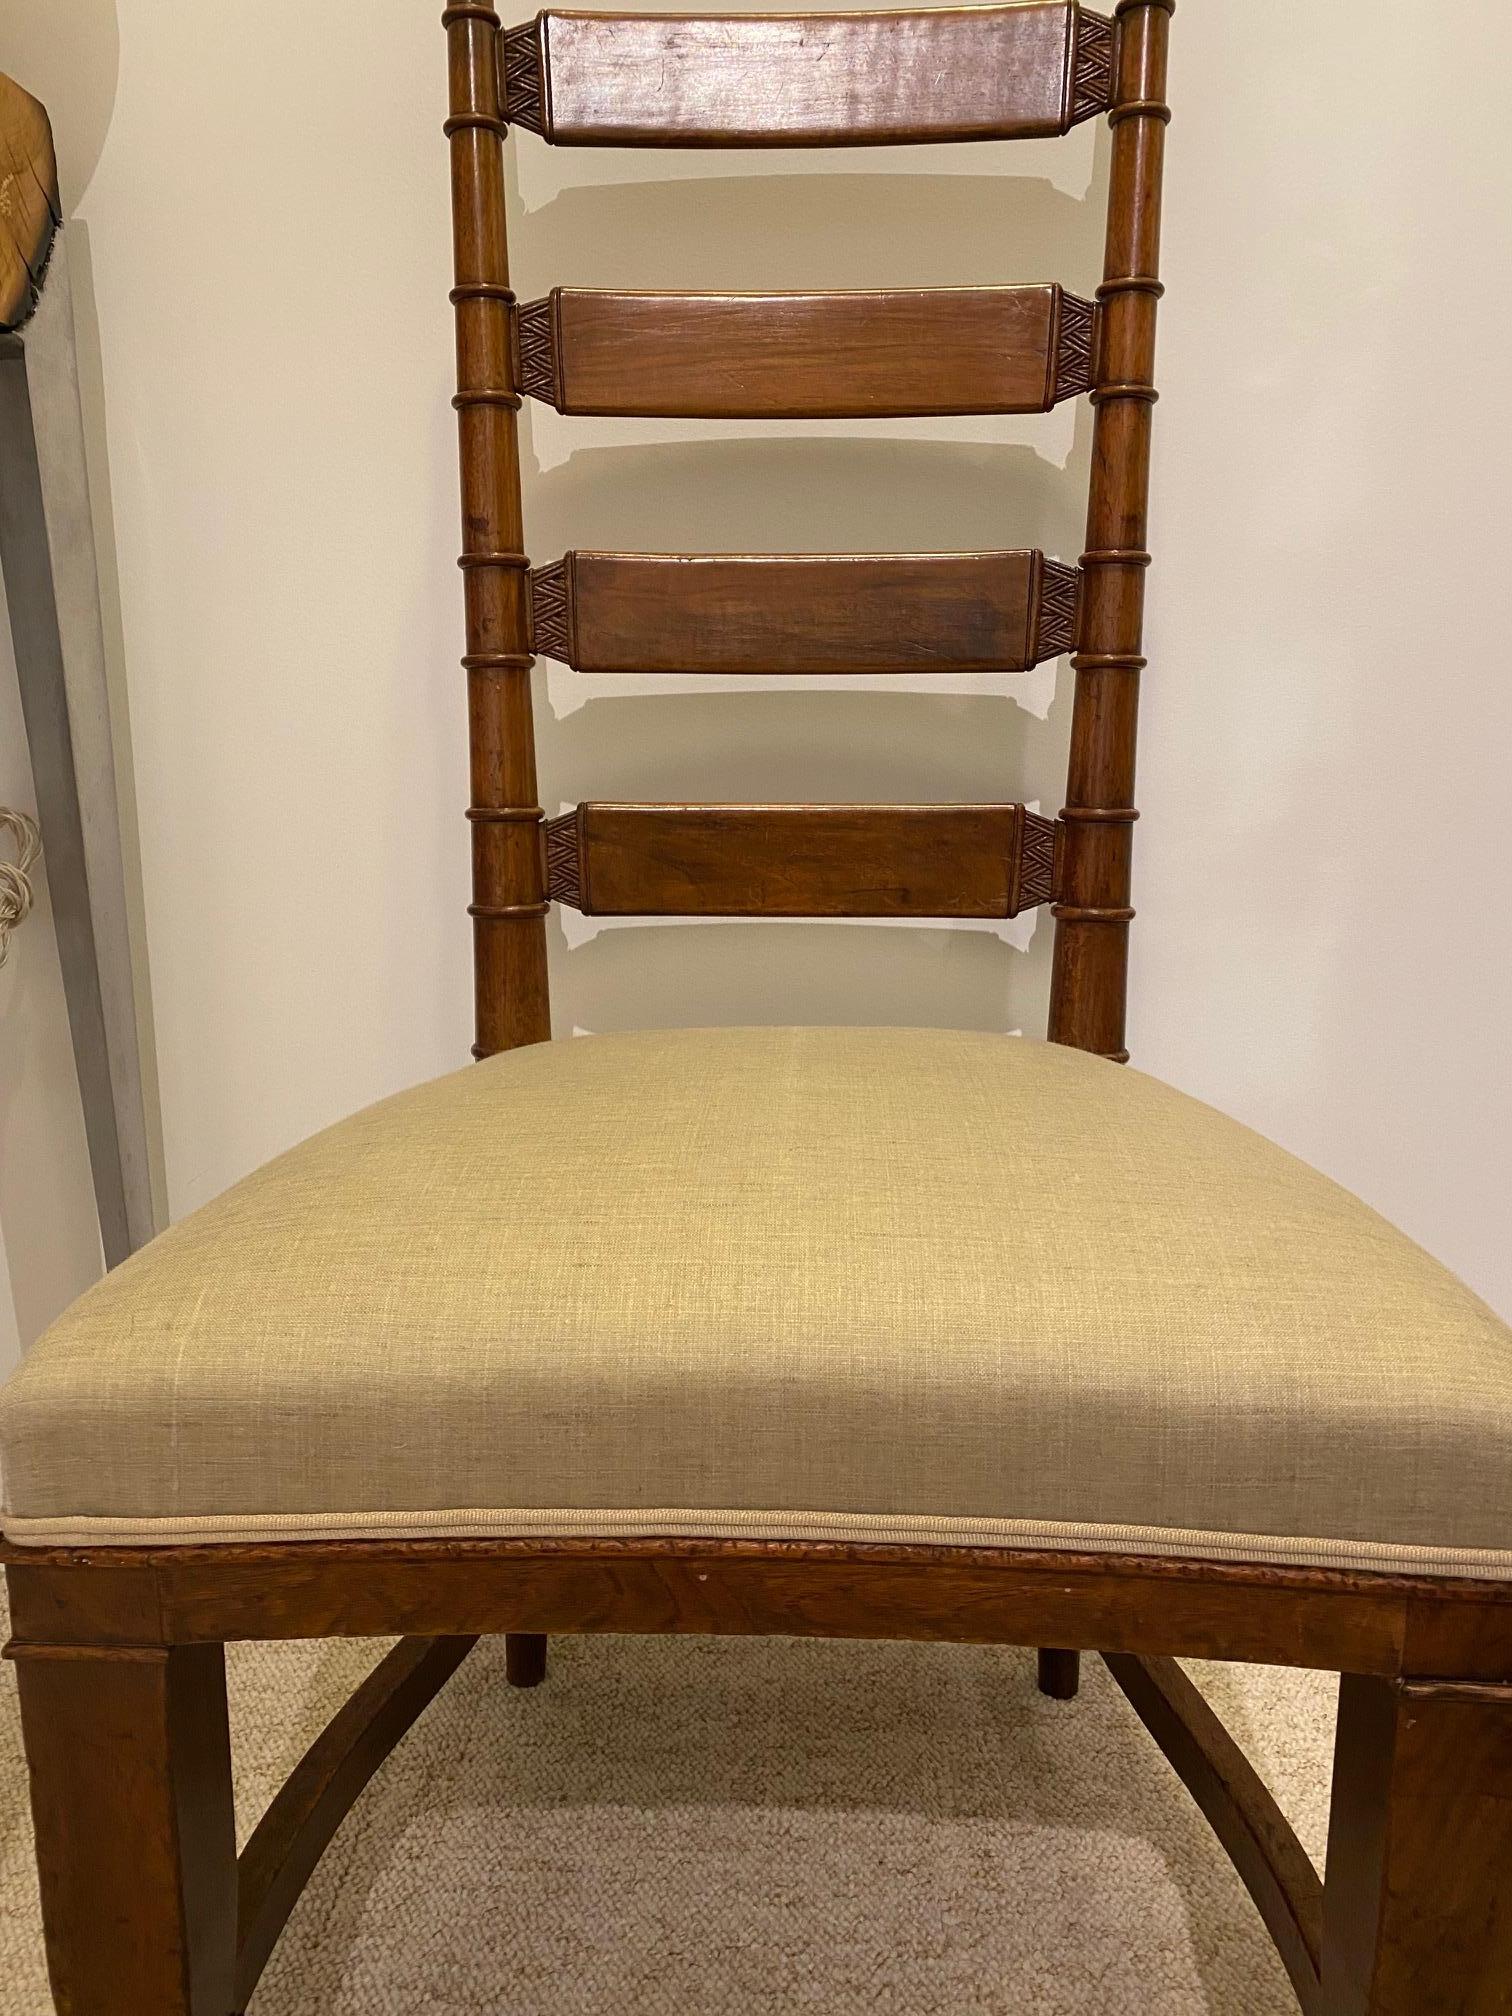 Tomaso Buzzi 1929 Pair of Wooden Structure Chairs For Sale 4